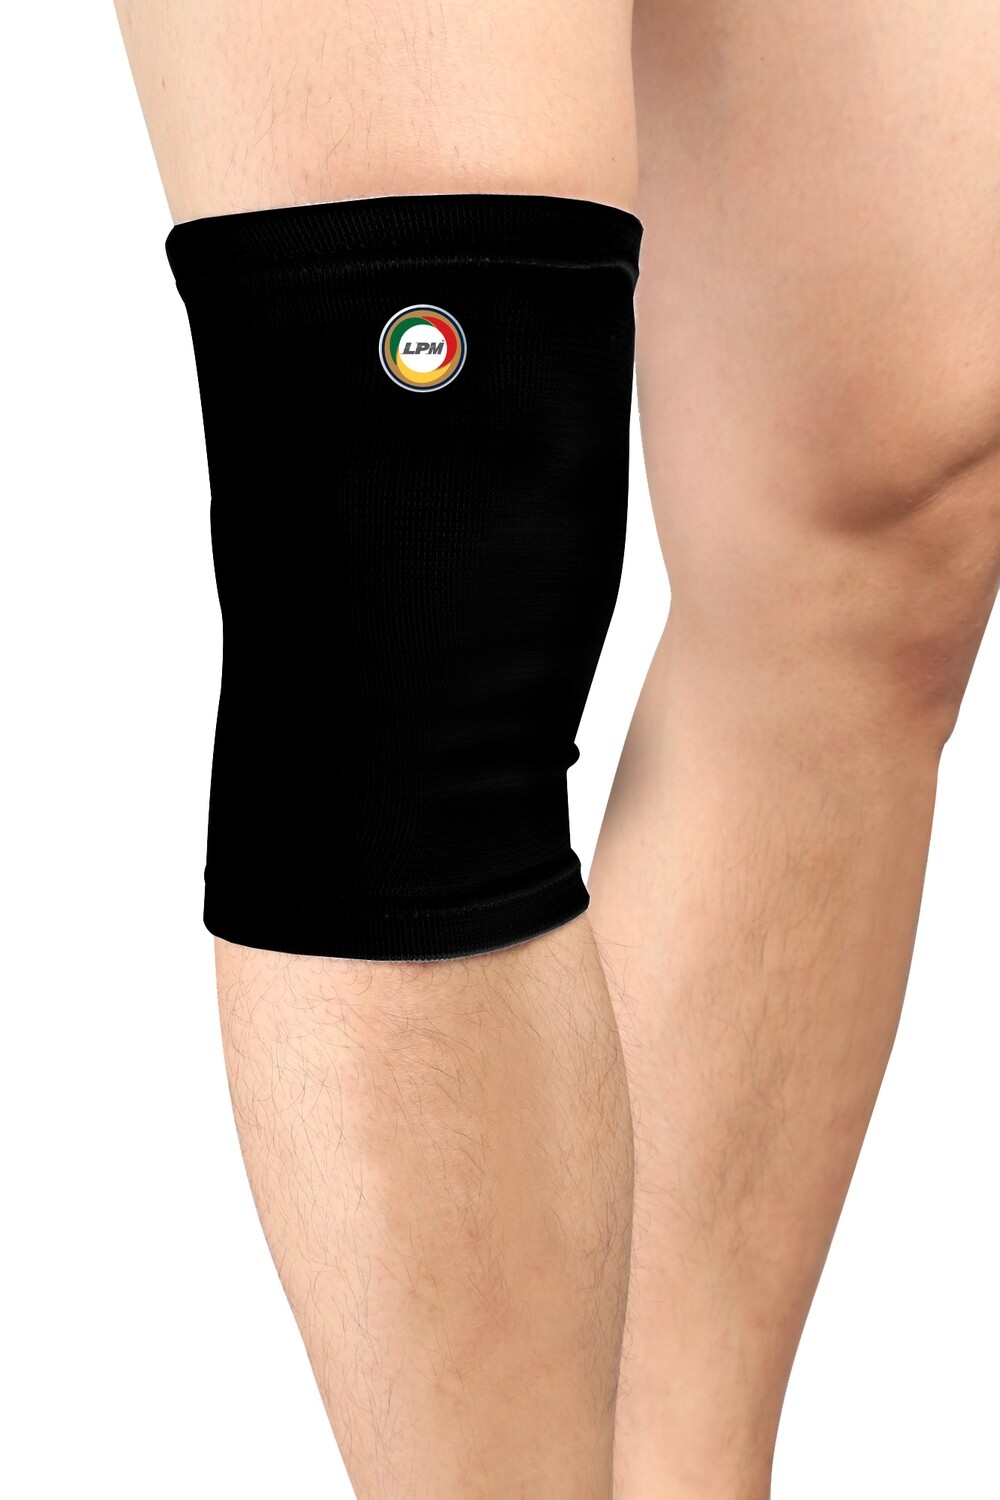 LPM KNEE SUPPORT